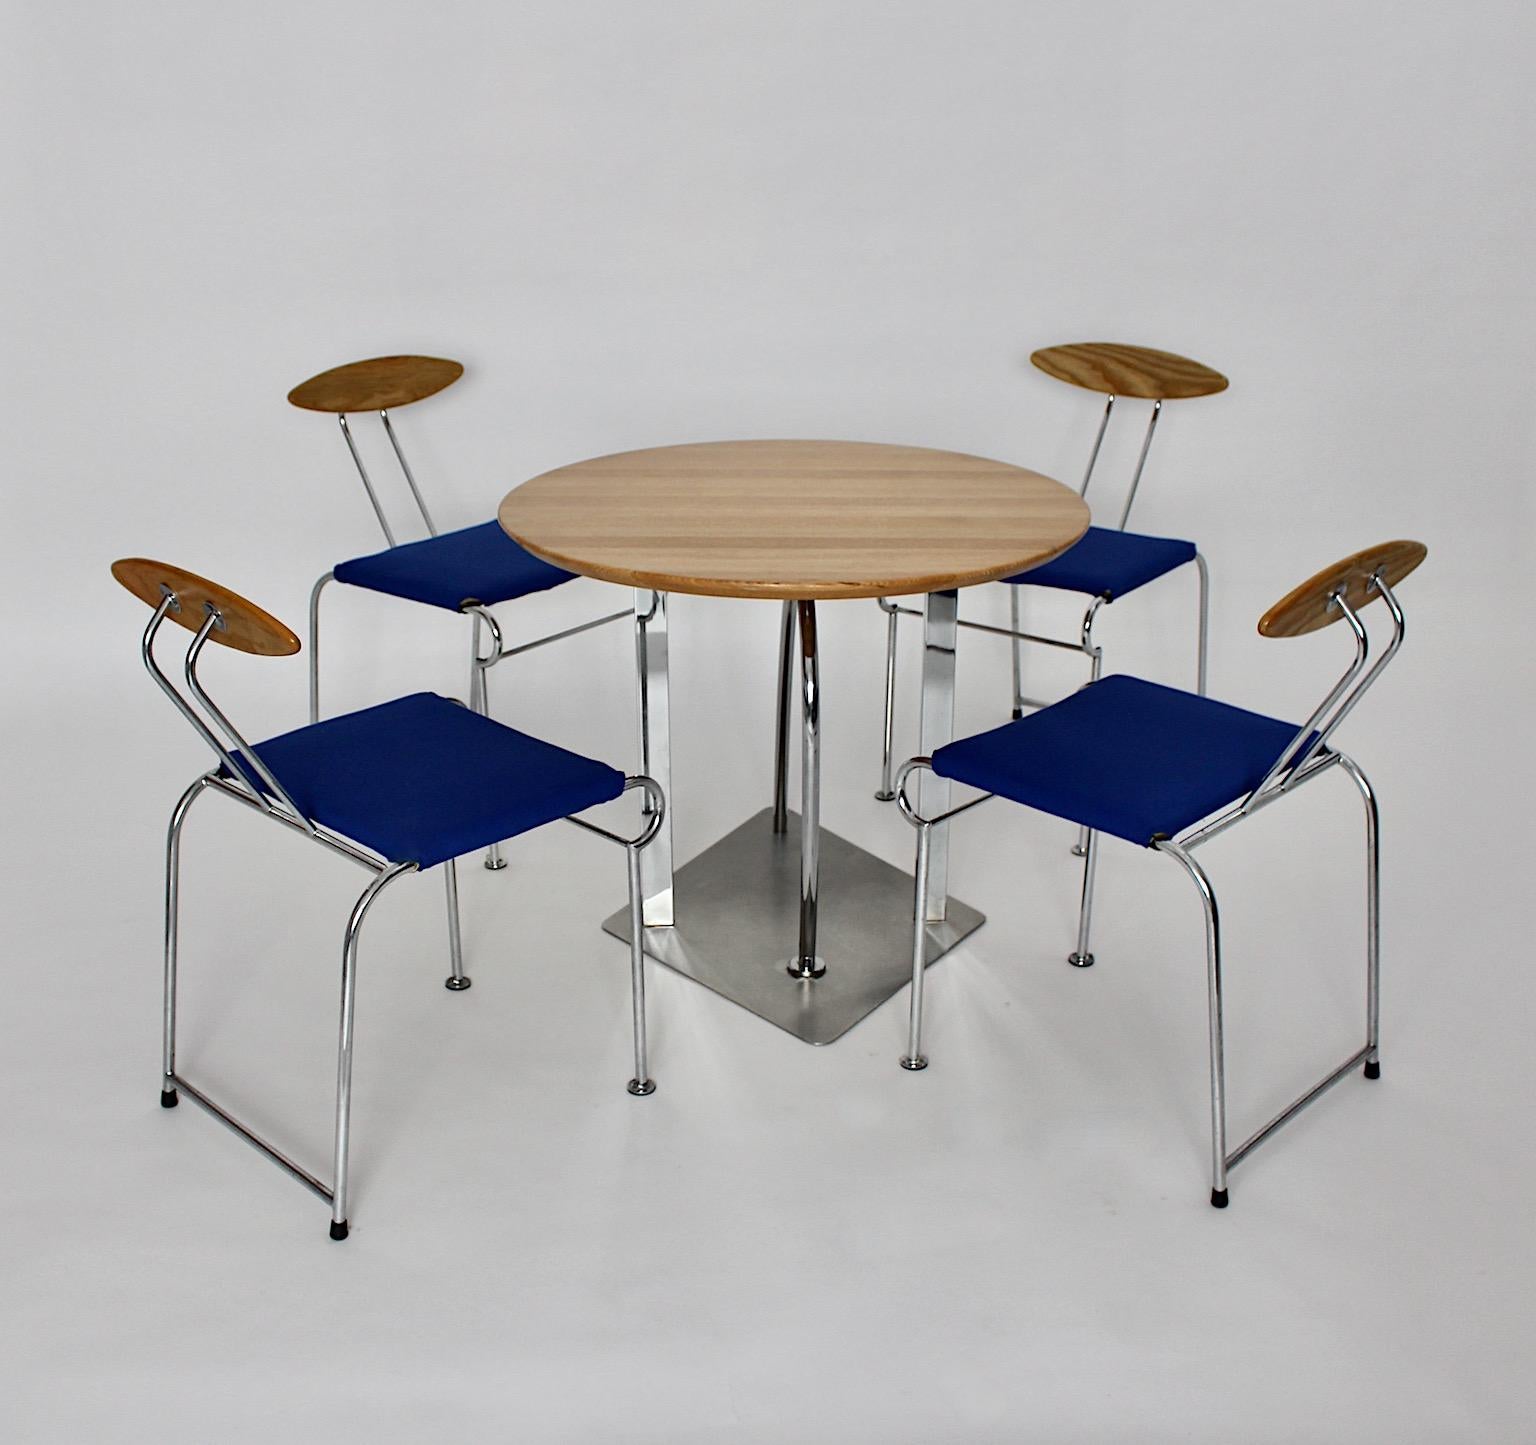 Postmodern Memphis style vintage dining room set designed by Massimo Iosa Ghini for Moroso circa 1987 Italy from ash, metal and electric blue textil fabric.
The beautiful set shows a dining table with a round plate from ash with a base construction